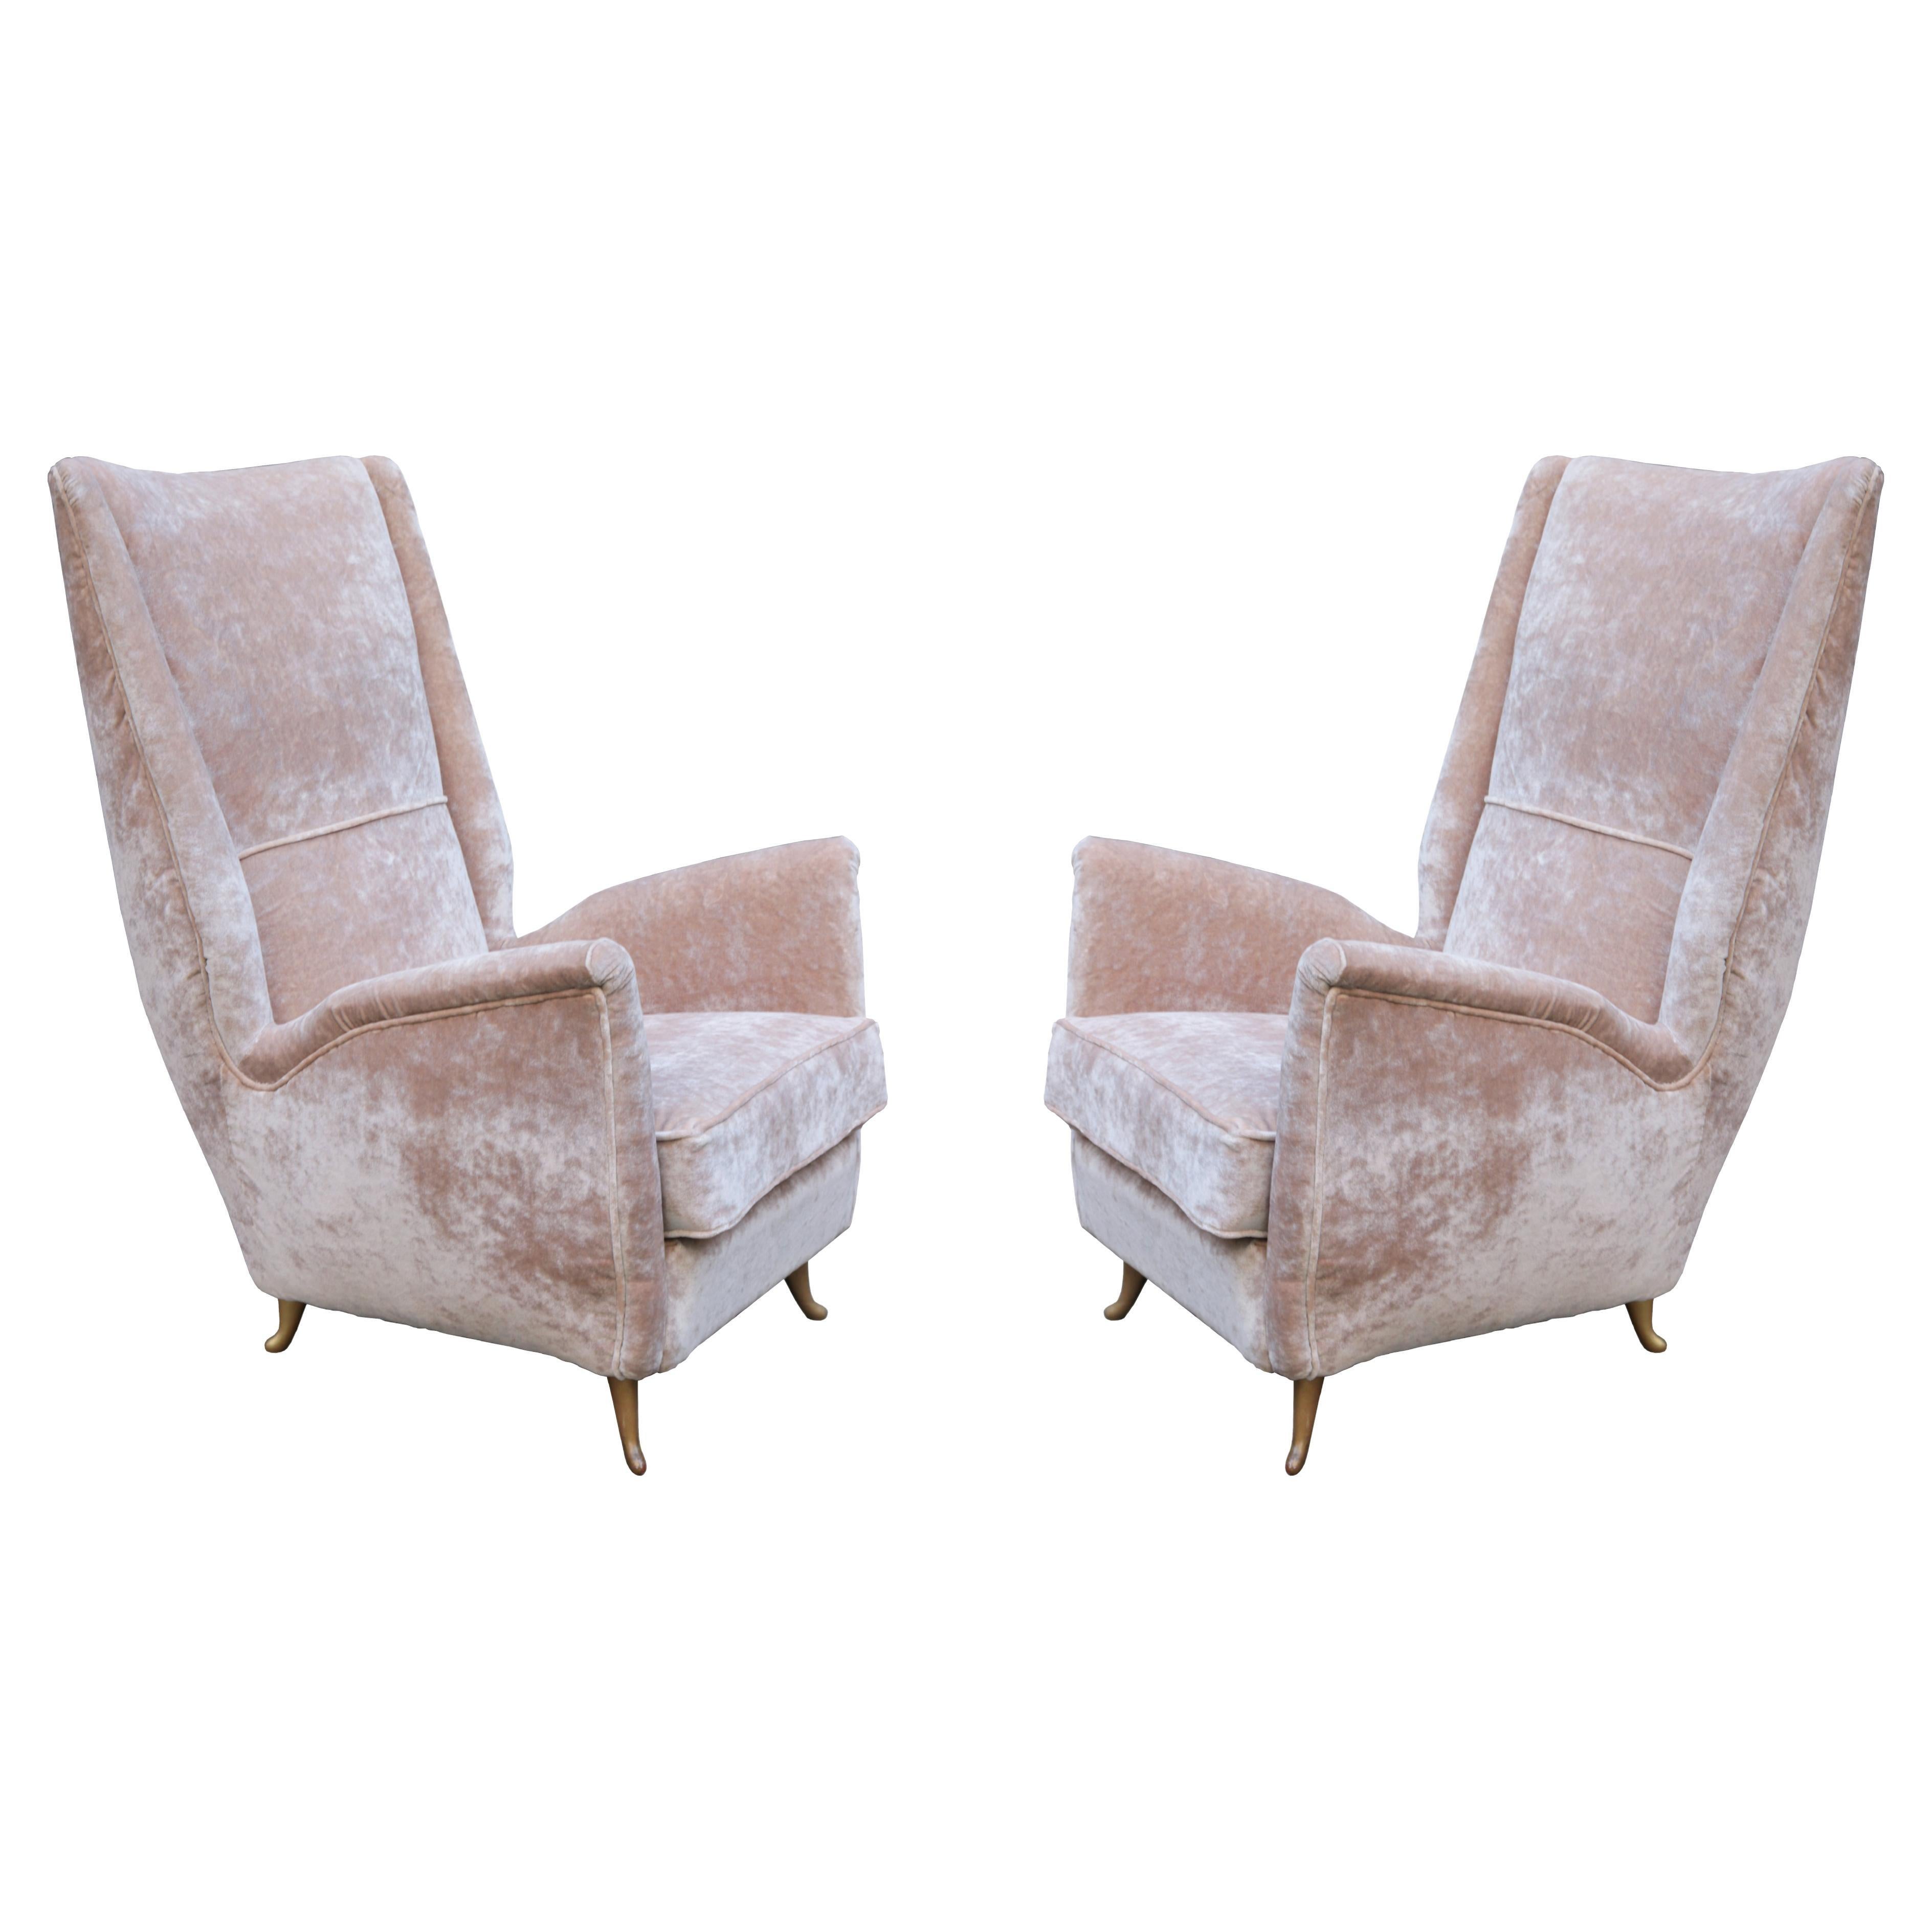 Pair of Italian Modernist Armchairs by ISA Bergamo For Sale